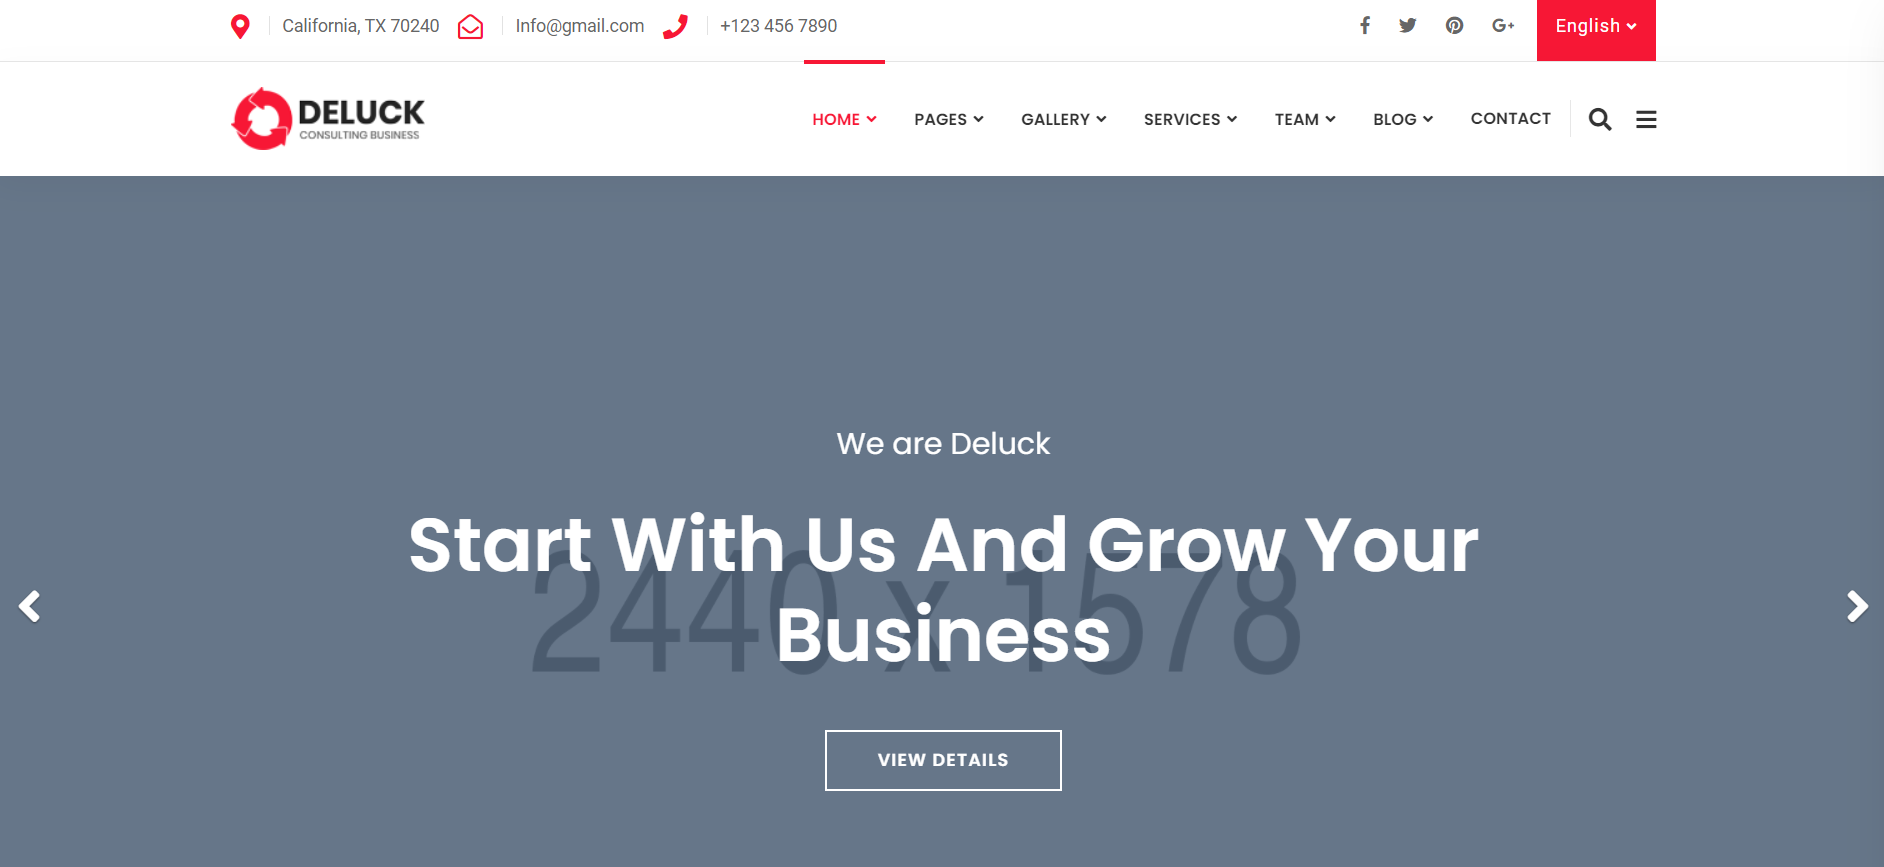 Deluck - Business Agency & Corporate Template